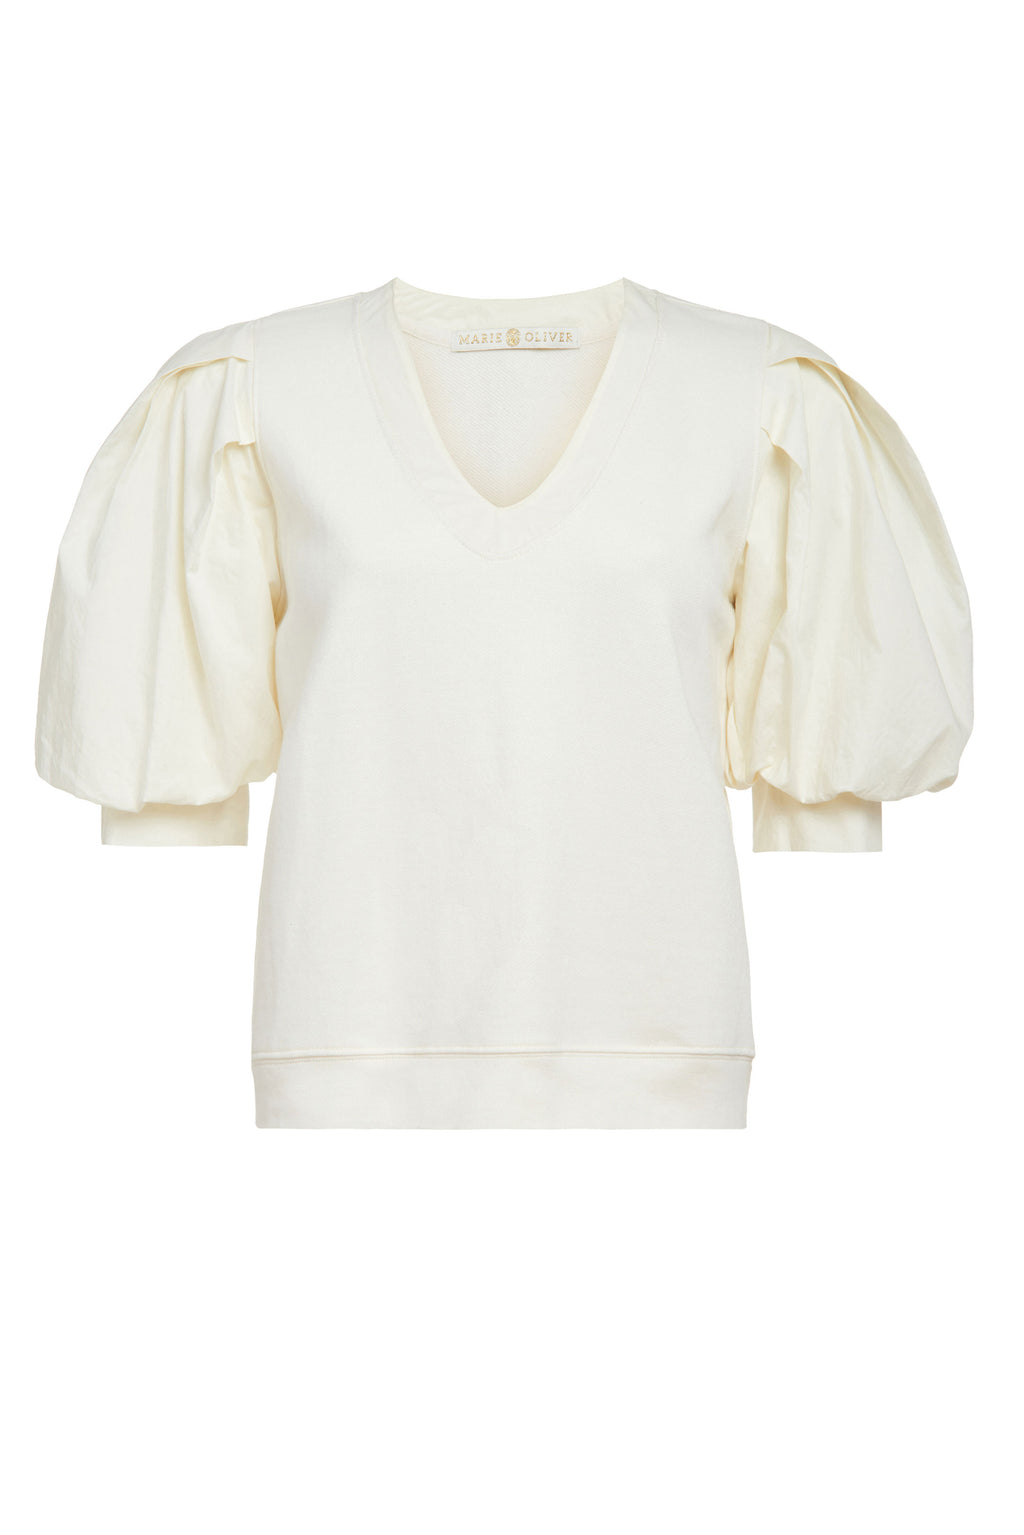 Elbow length top with puff sleeves and cuffs at the end of the sleeve, bows at the back of the elbow, and a rounded v-neck